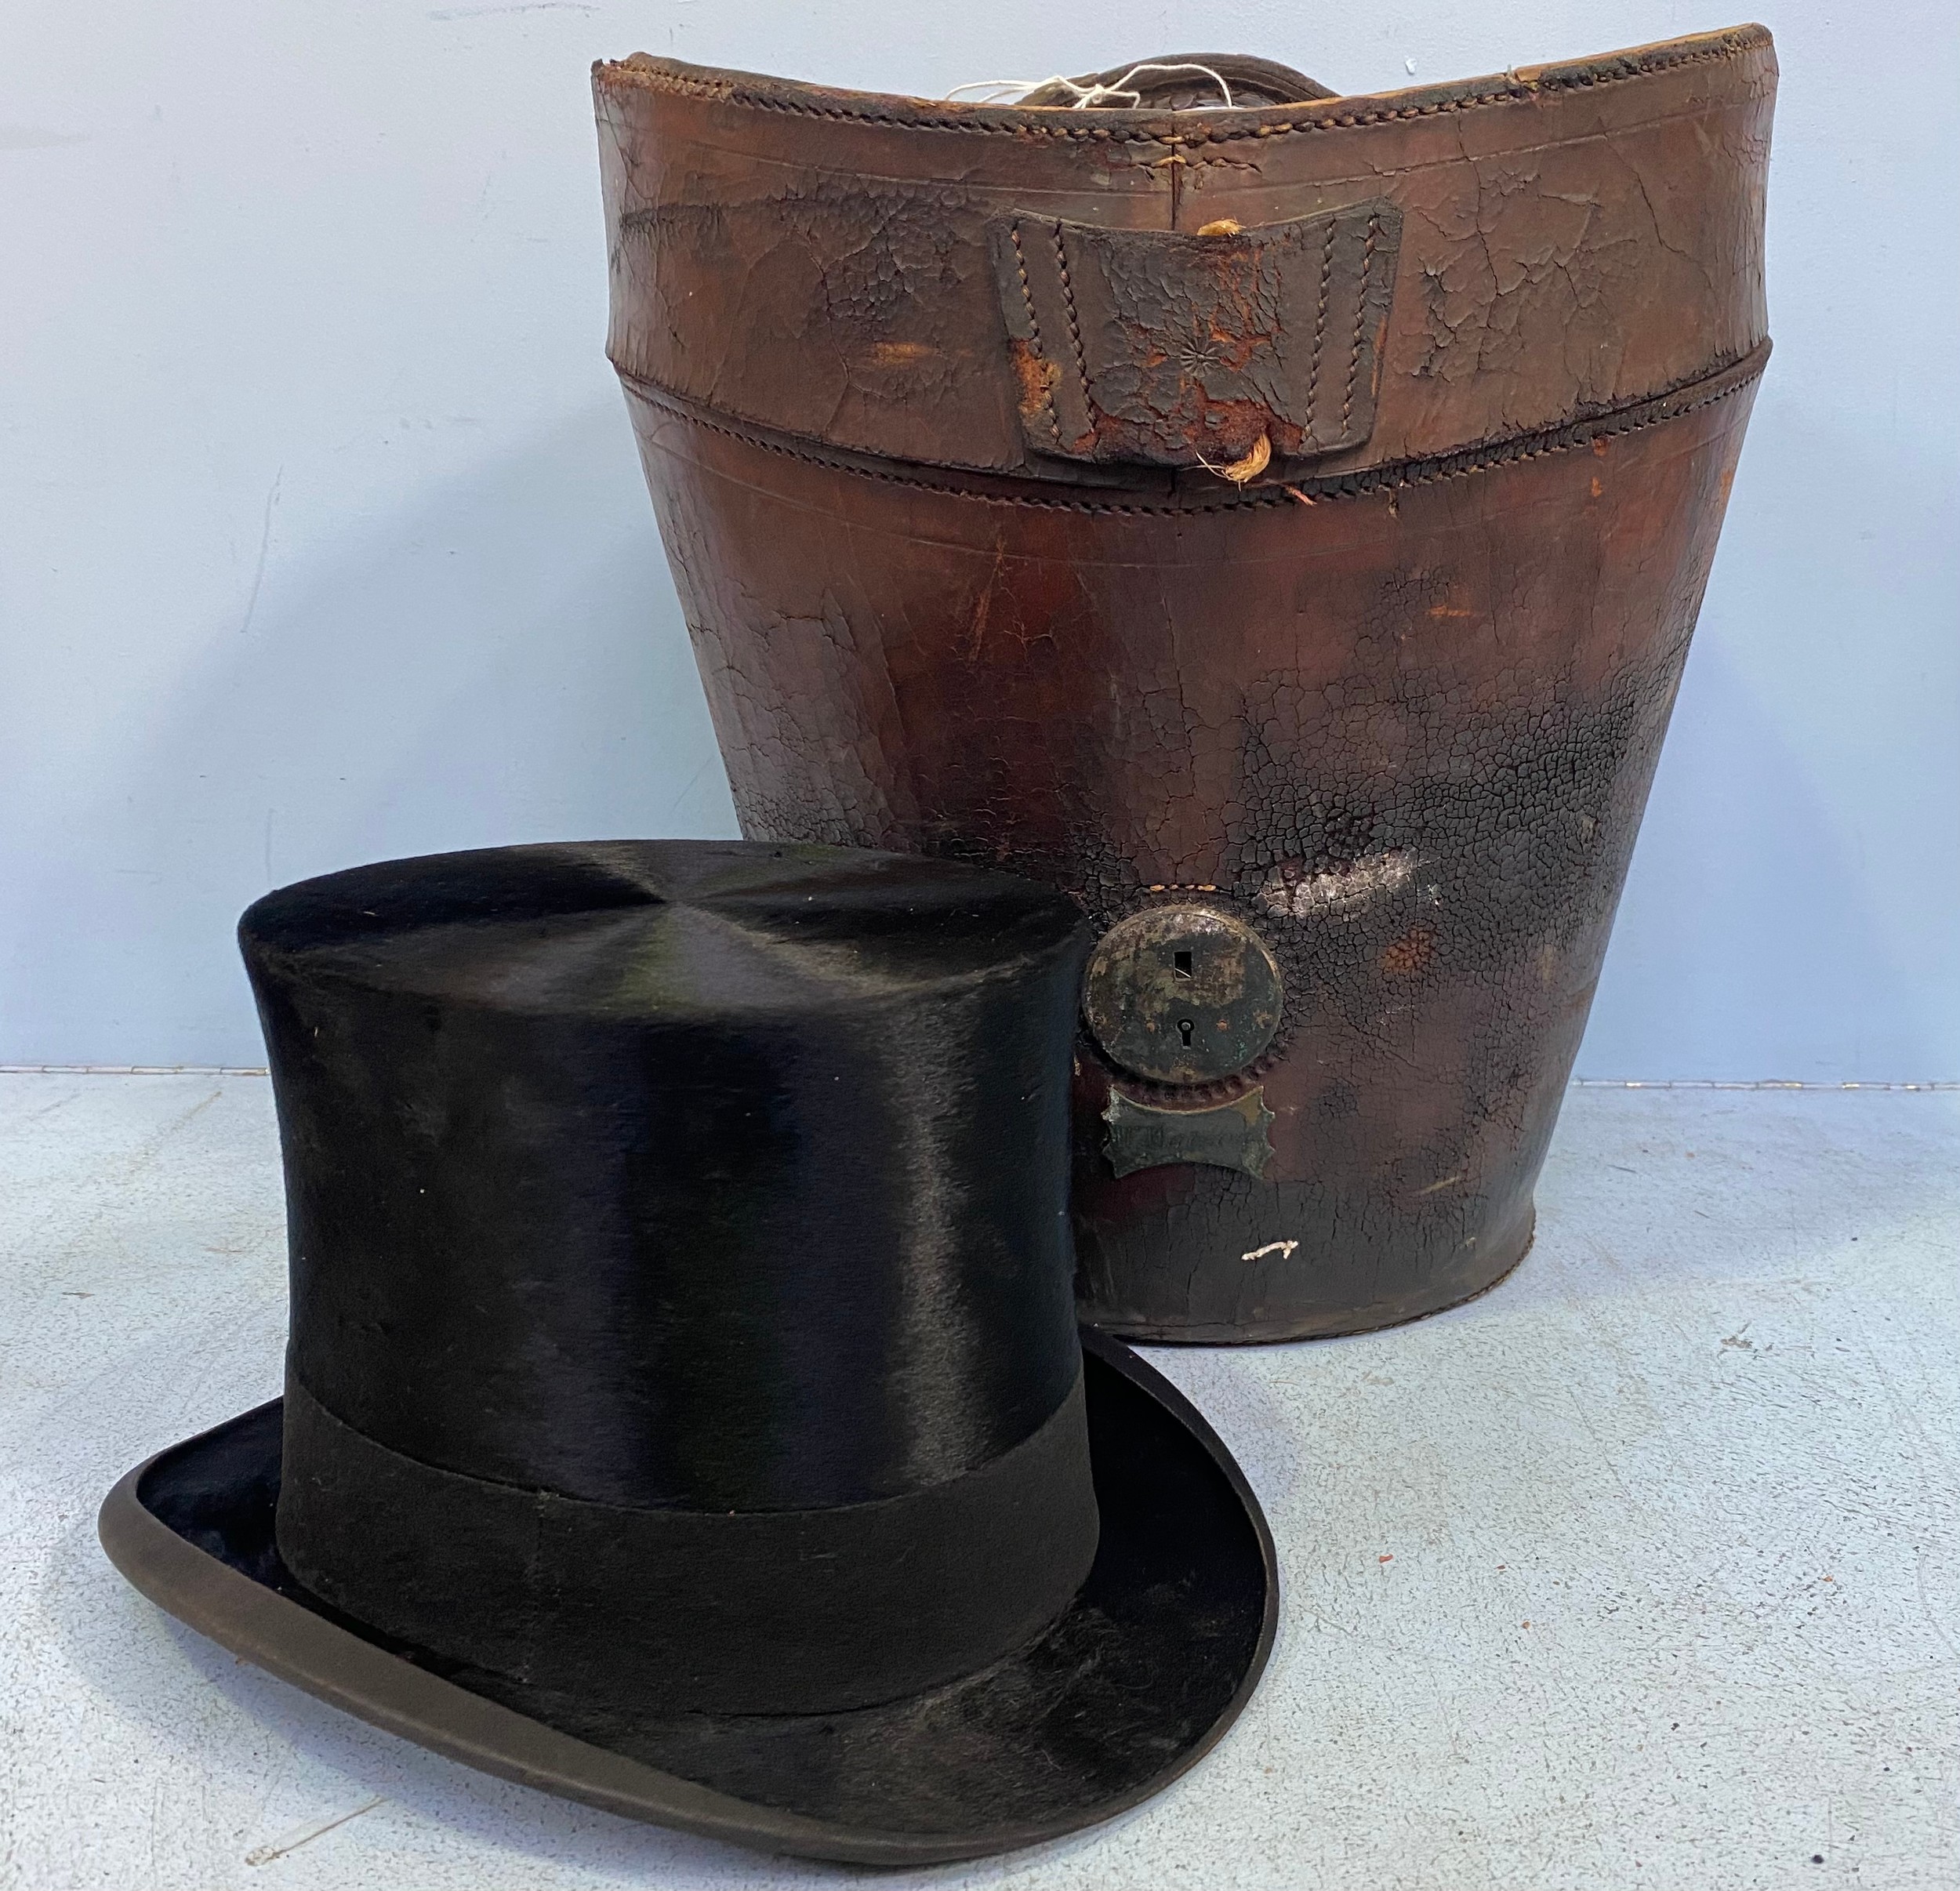 A vintage black silk top hat by Andre & Co. Ltd. Hatters, 163 Piccadilly, W. Andres Superfine,